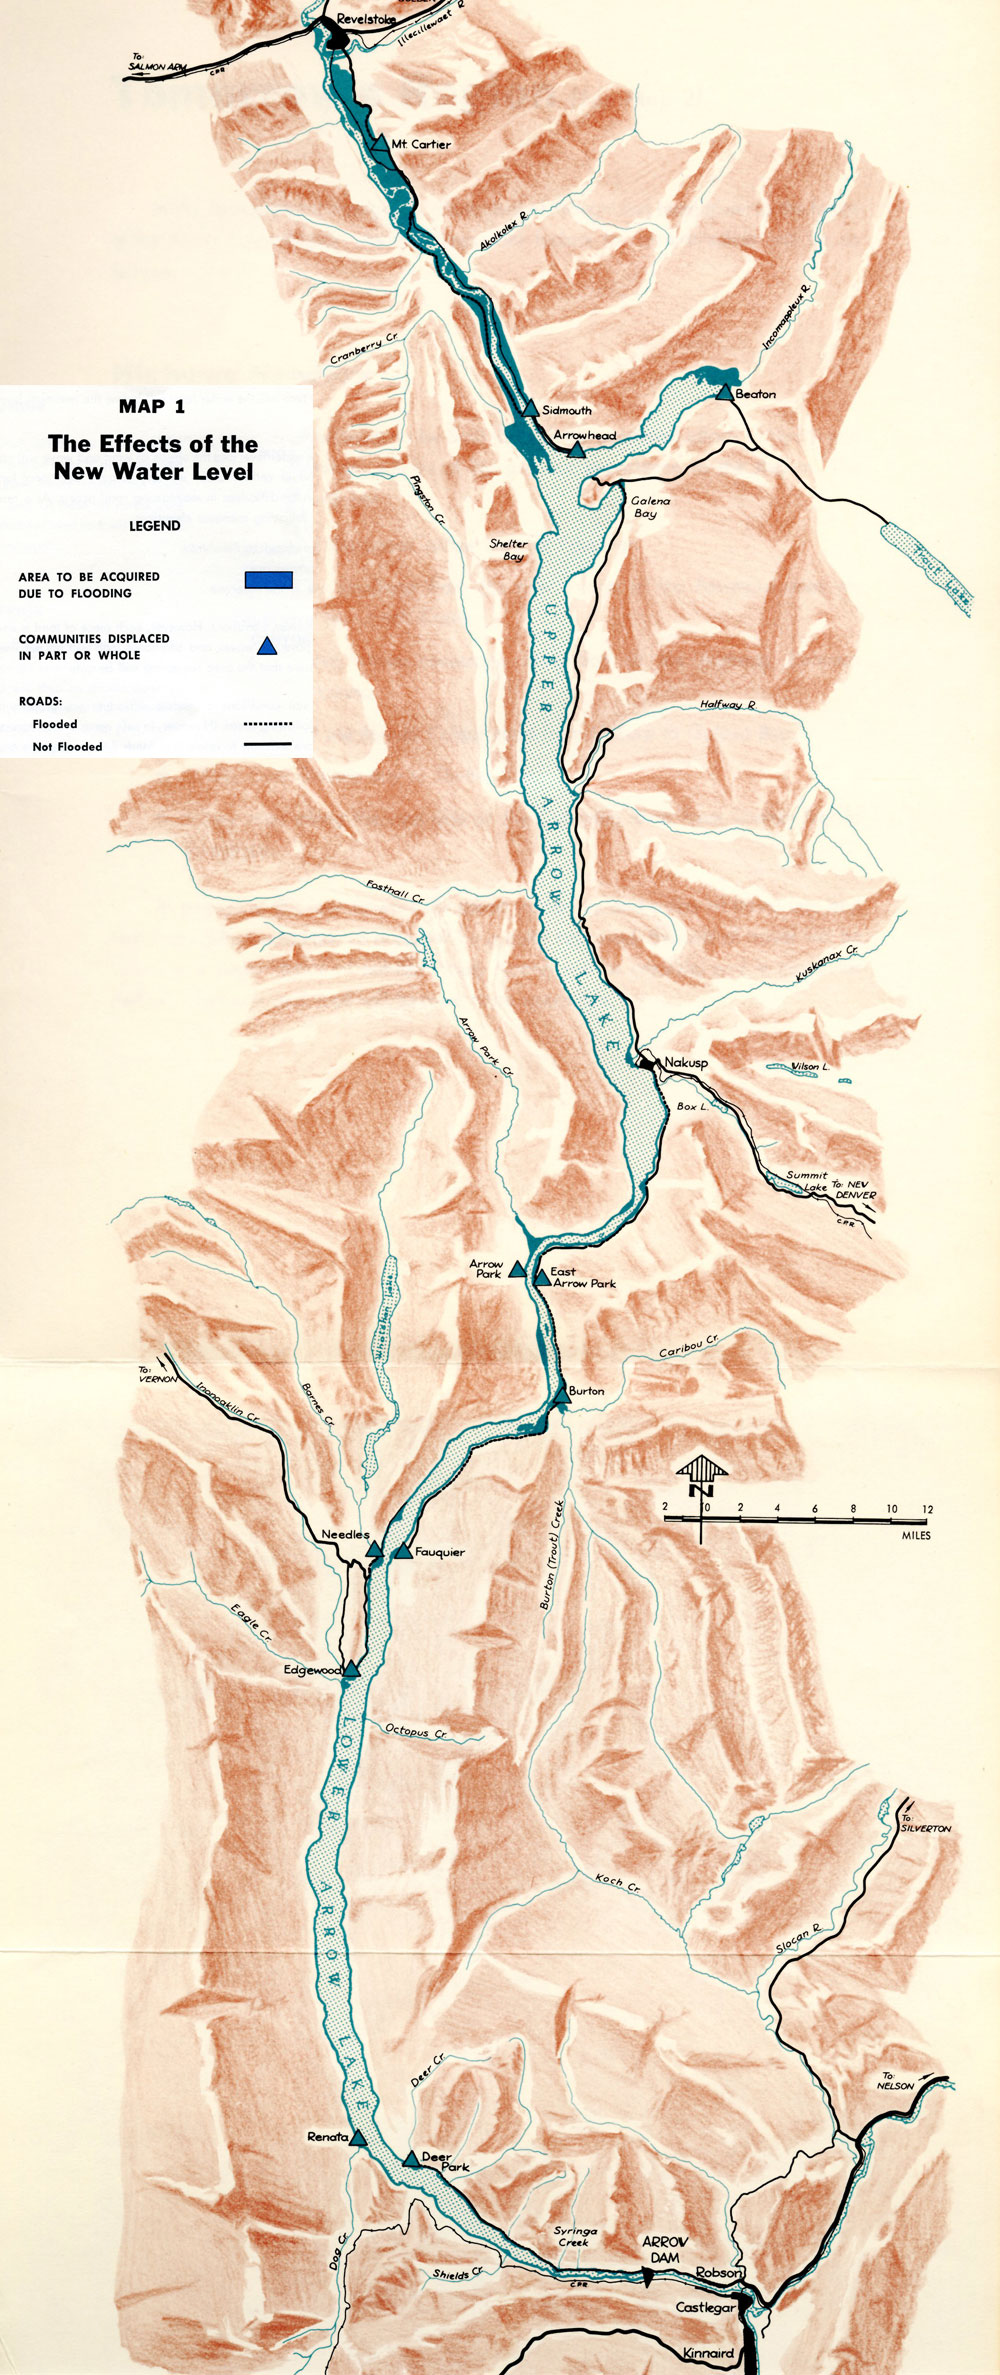 Peach-orange map of the proposed Arrow Lakes Reservoir. Legend shows symbols for 'areas to be acquired due to flooding', 'communities displaced in part or whole', and roads flood and not flooded.